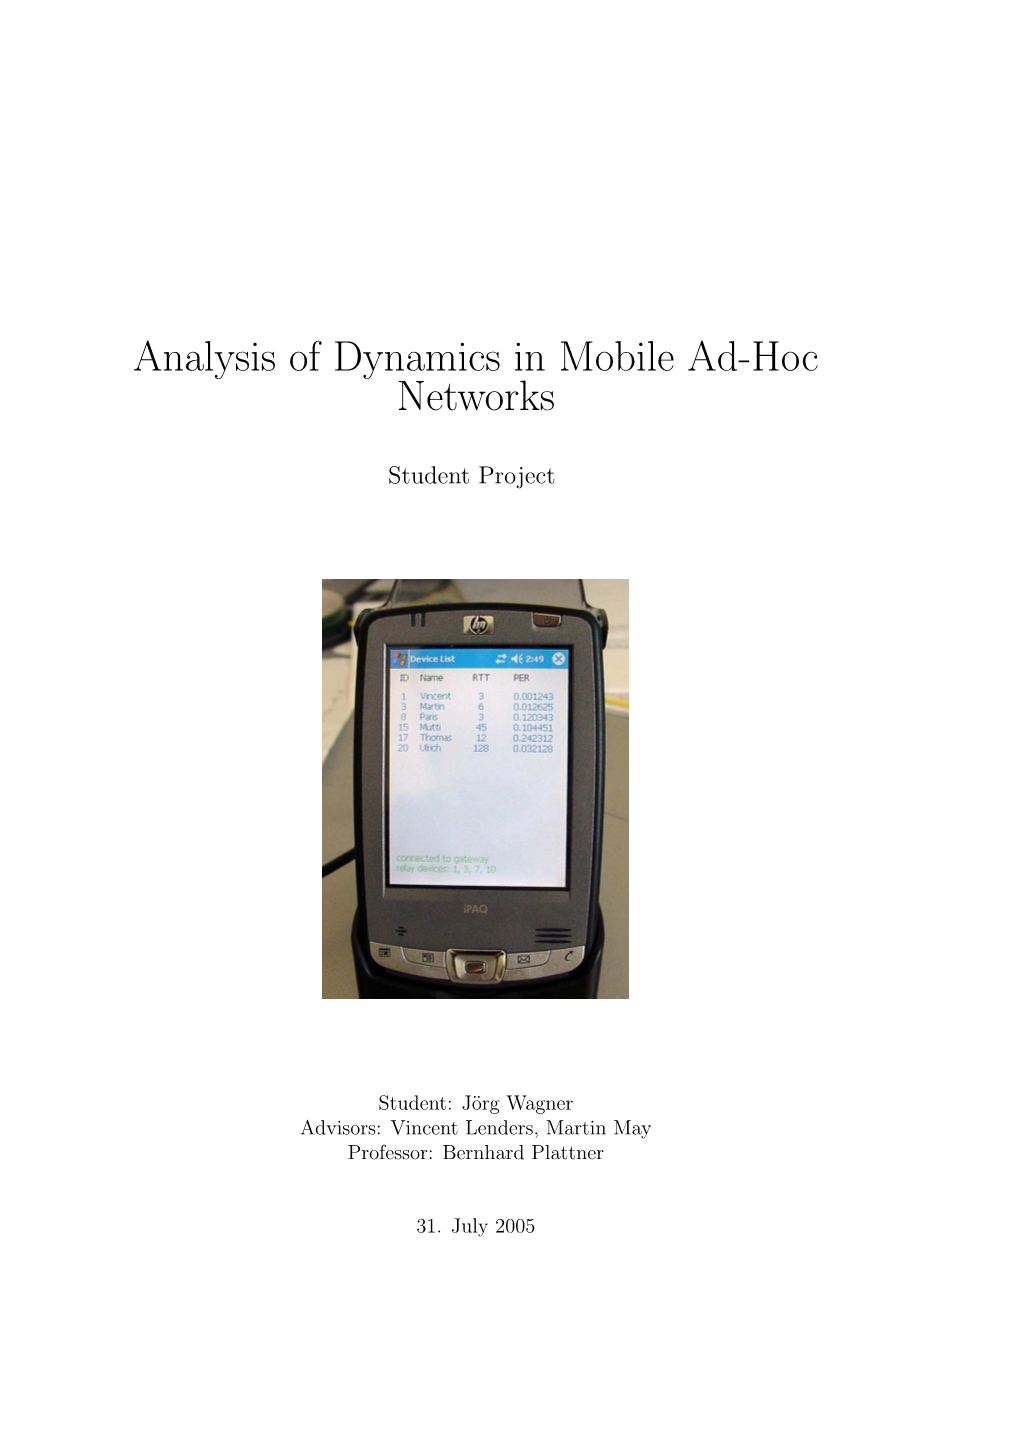 Analysis of Dynamics in Mobile Ad-Hoc Networks